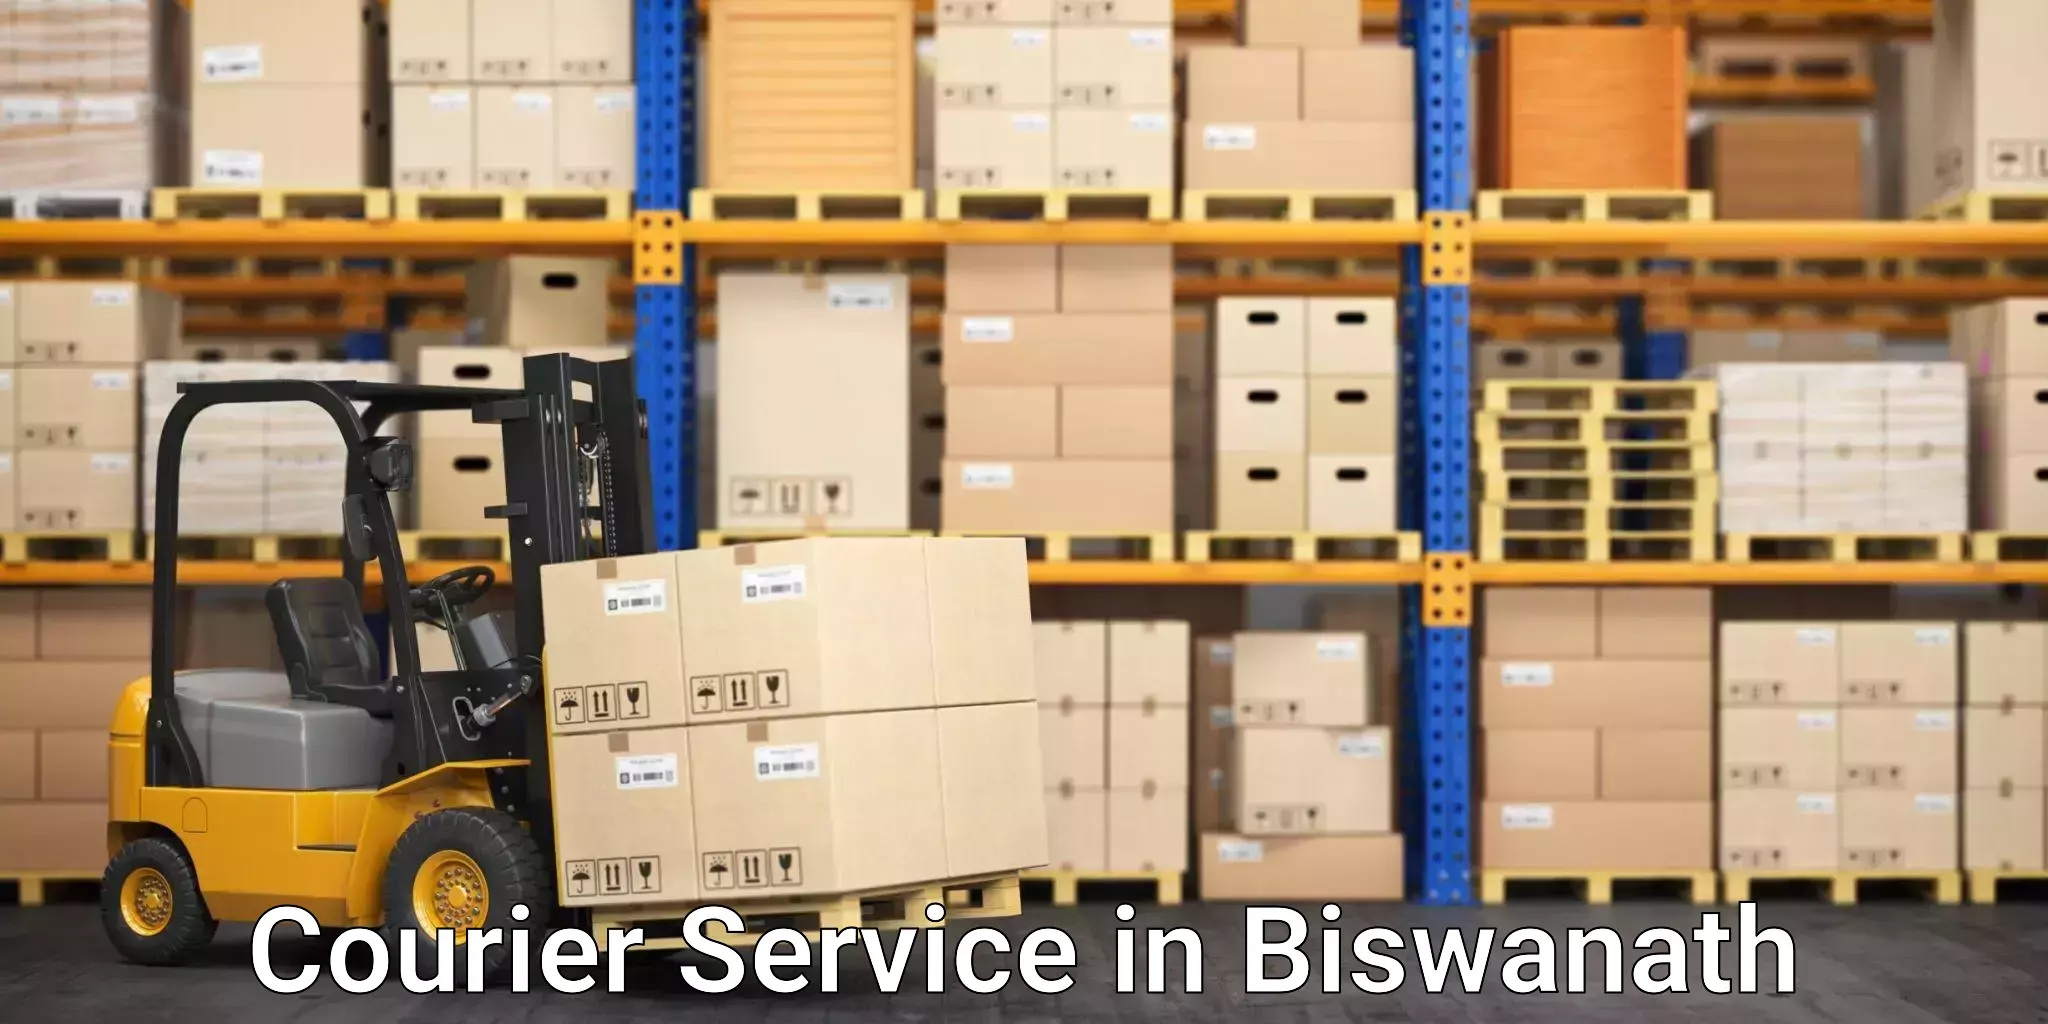 Express delivery network in Biswanath